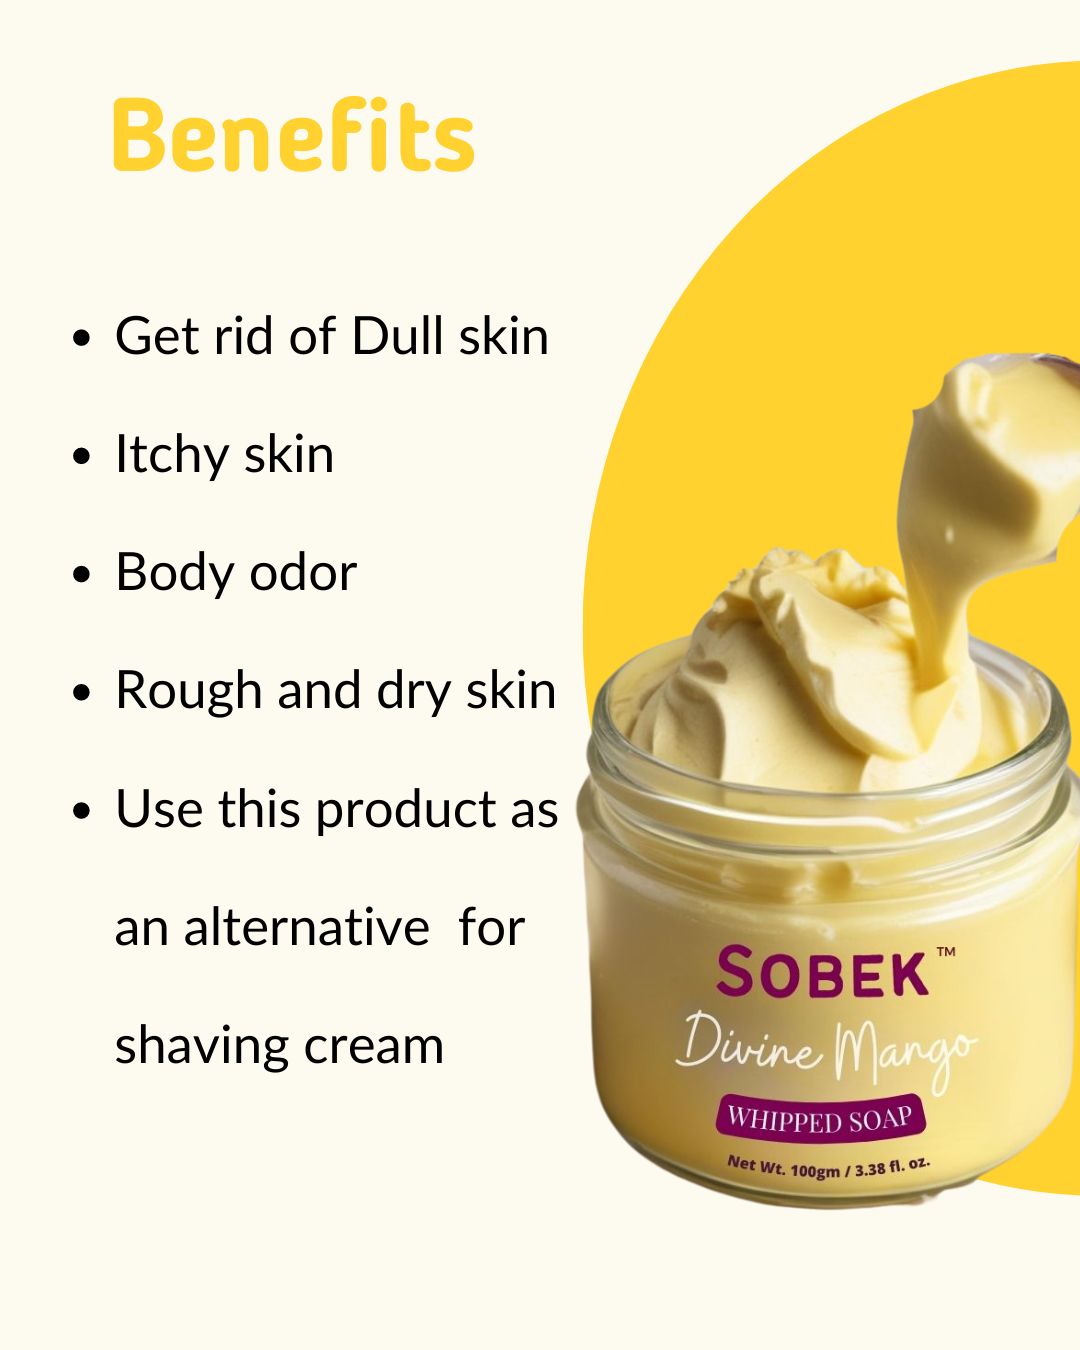 Infographic showing mango whipped soap benefits